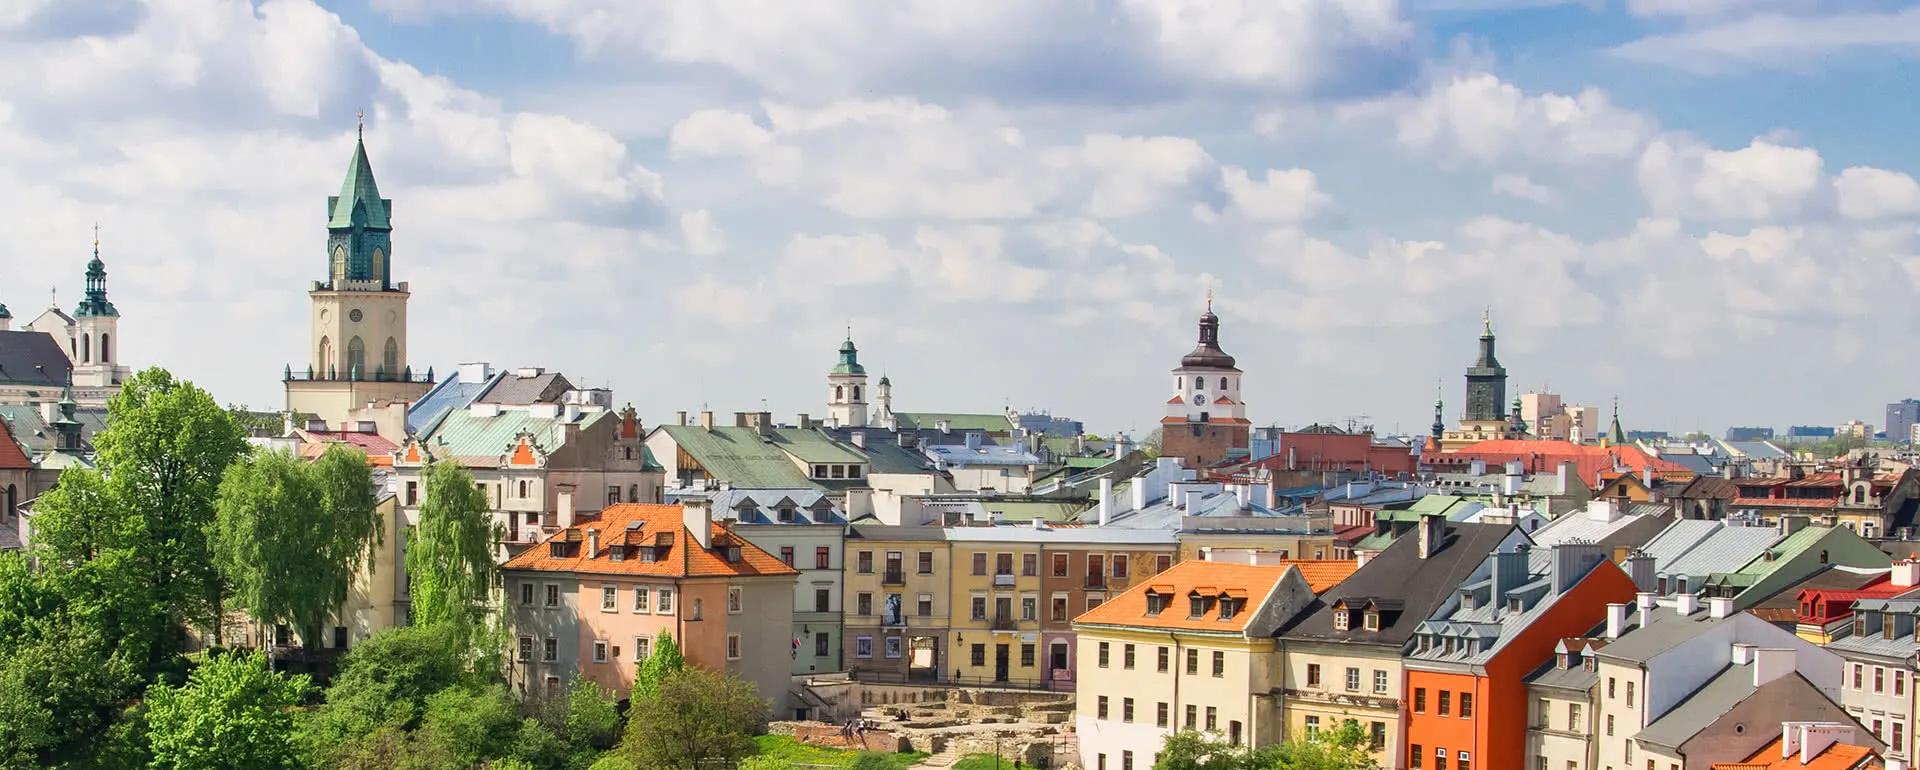 Lublin - the destination with youth hostels